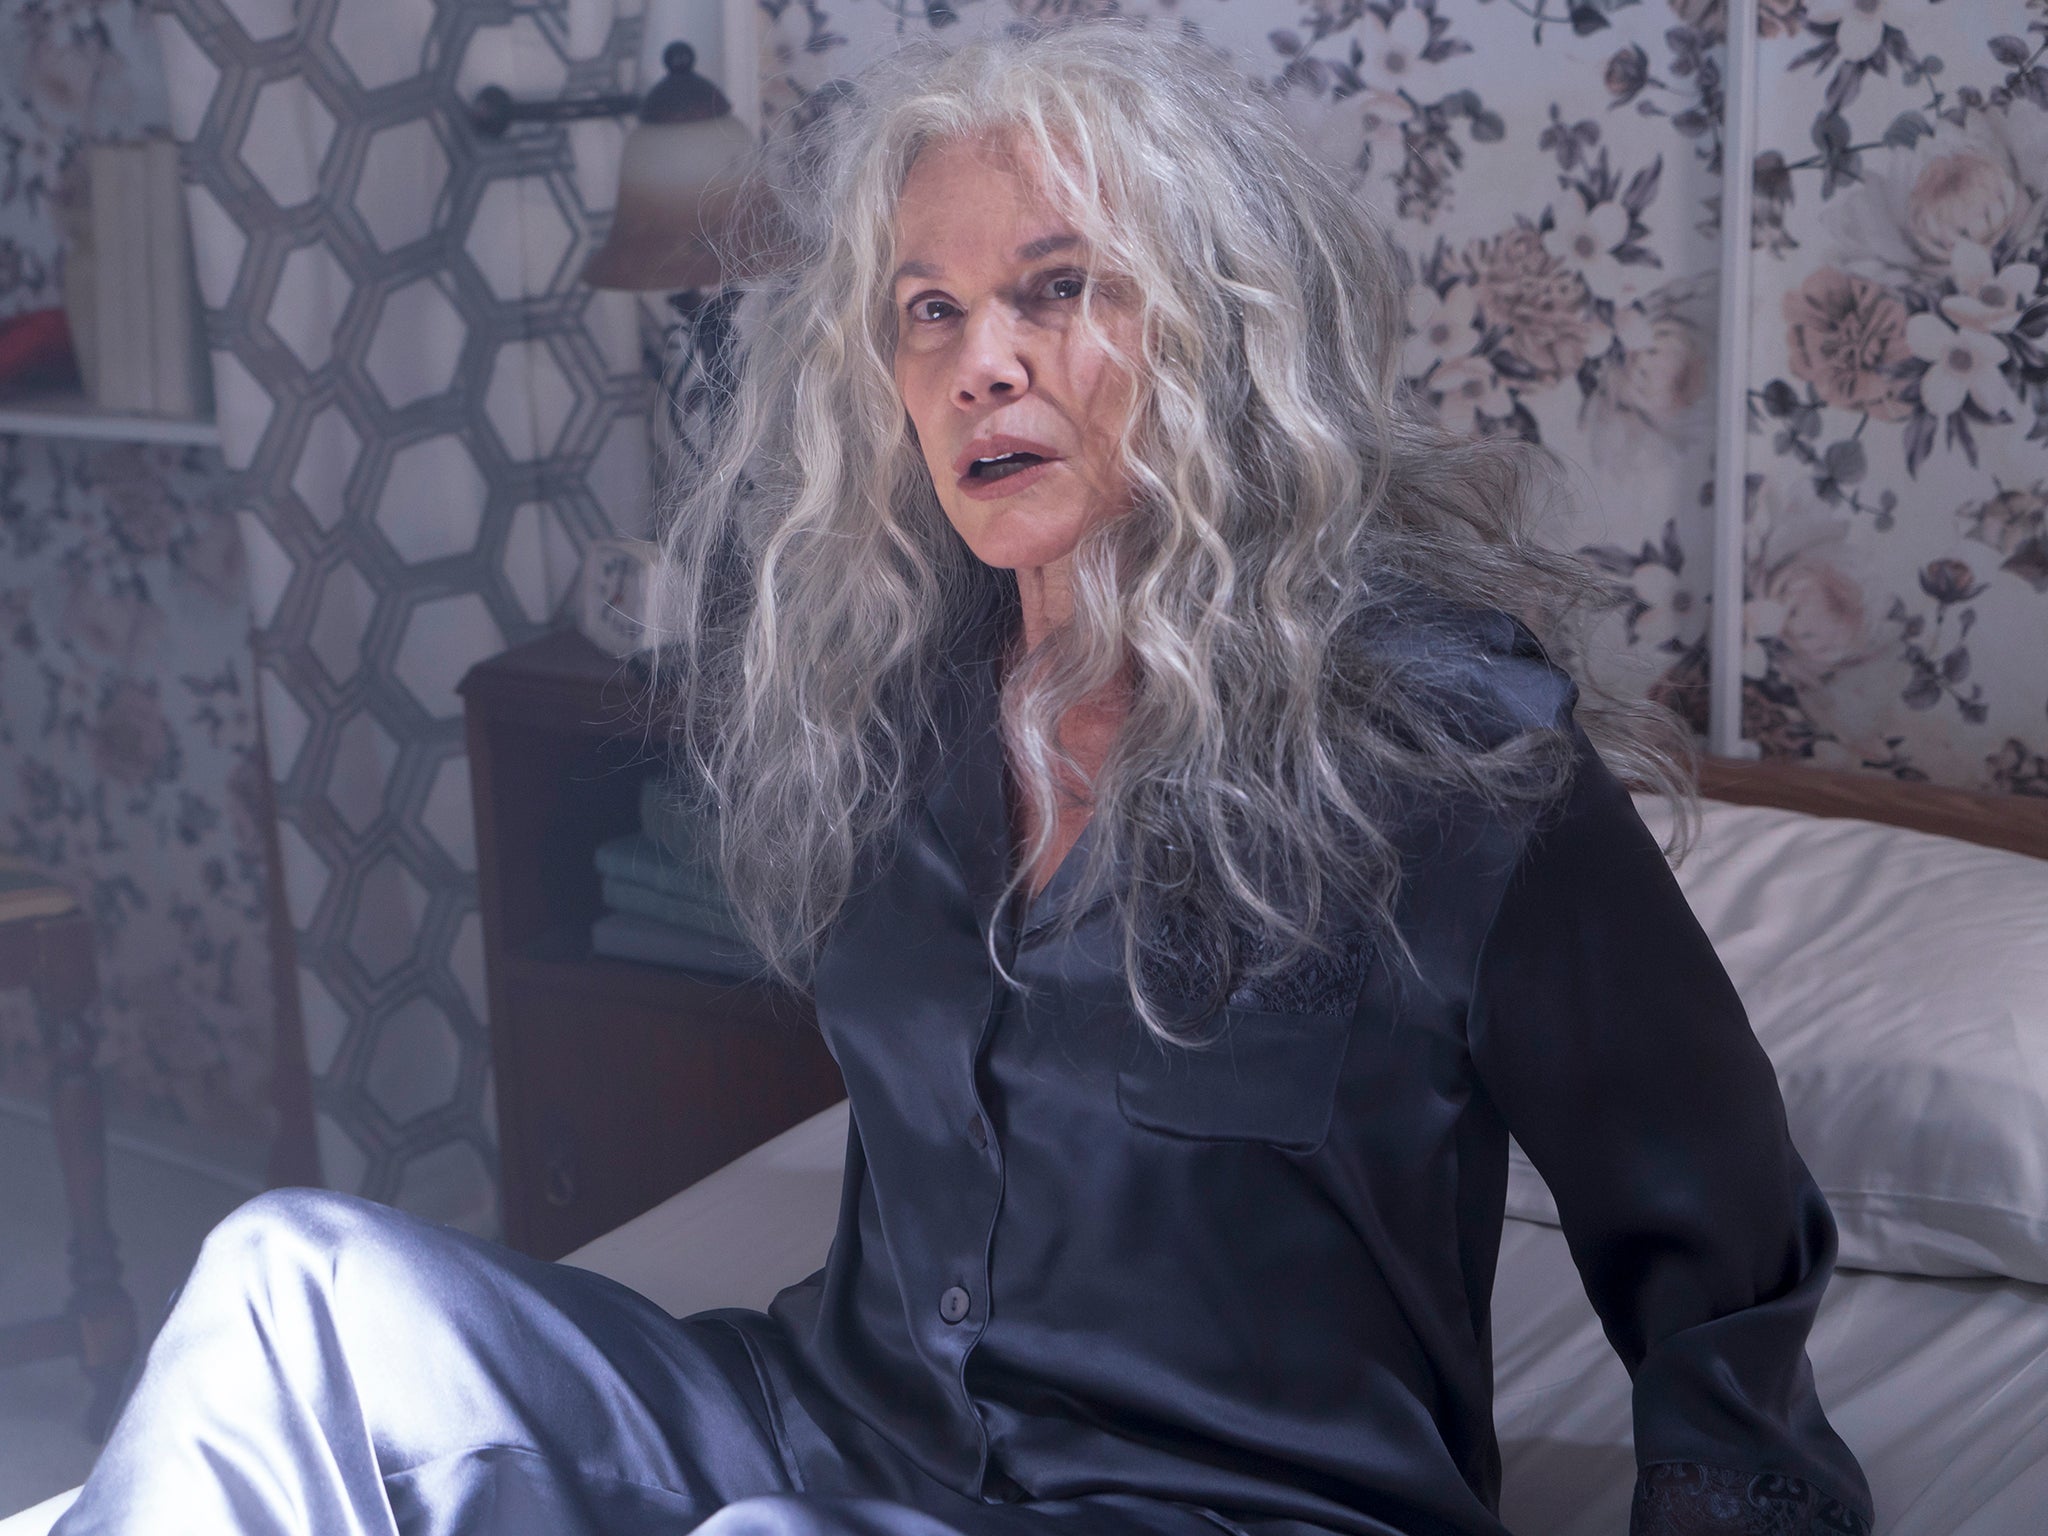 Spooked: Barbara Hershey in ‘The Manor'